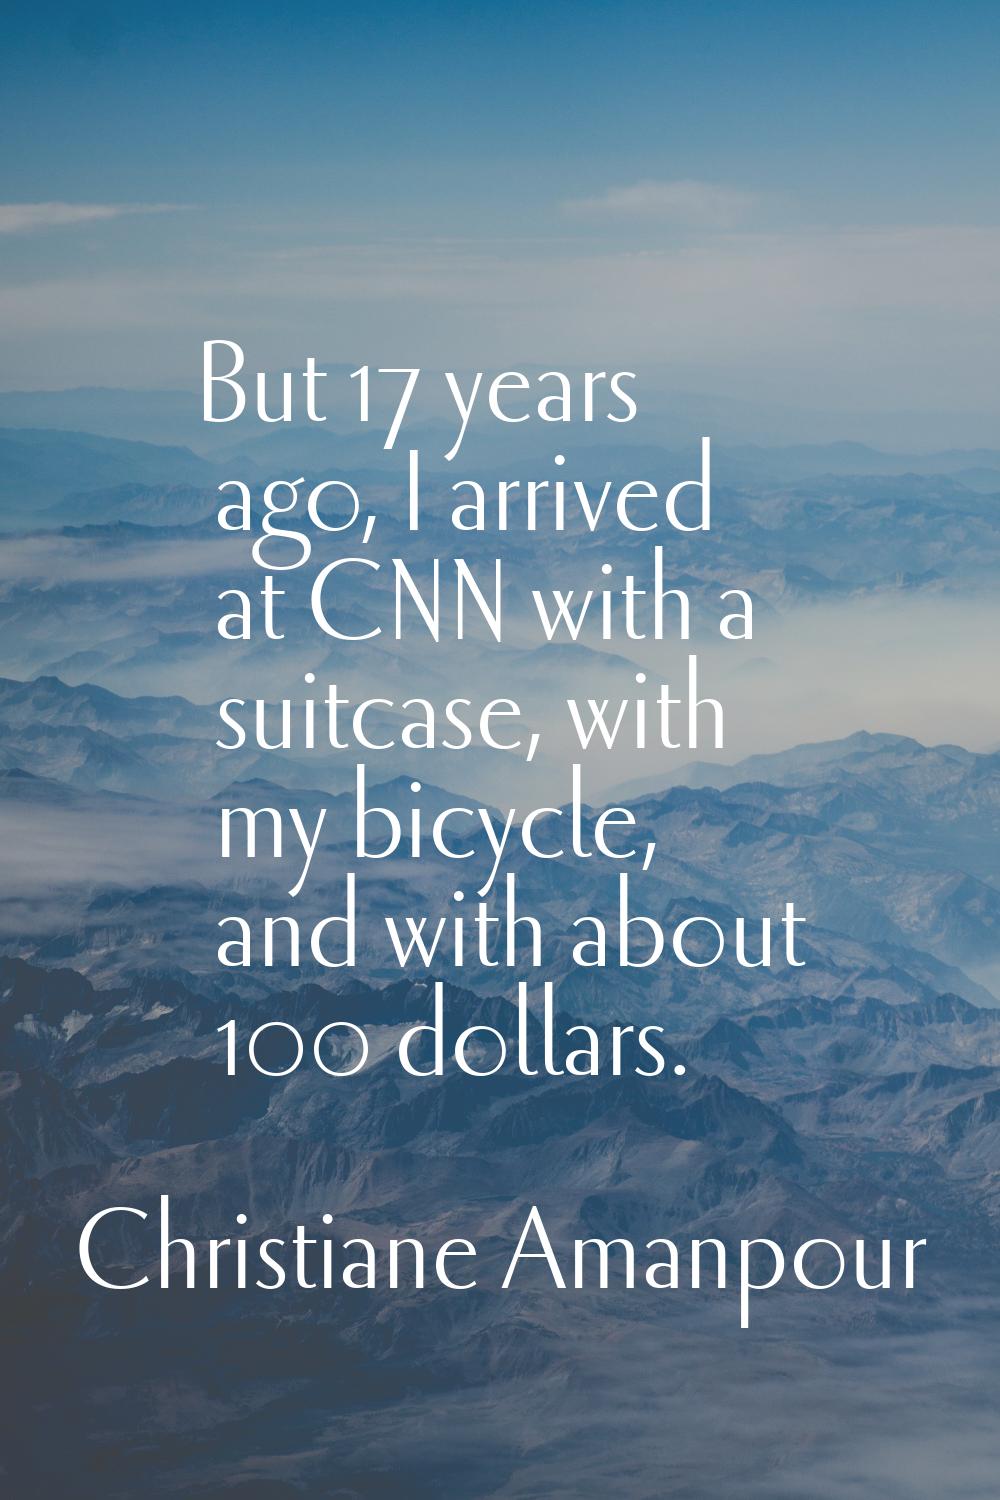 But 17 years ago, I arrived at CNN with a suitcase, with my bicycle, and with about 100 dollars.